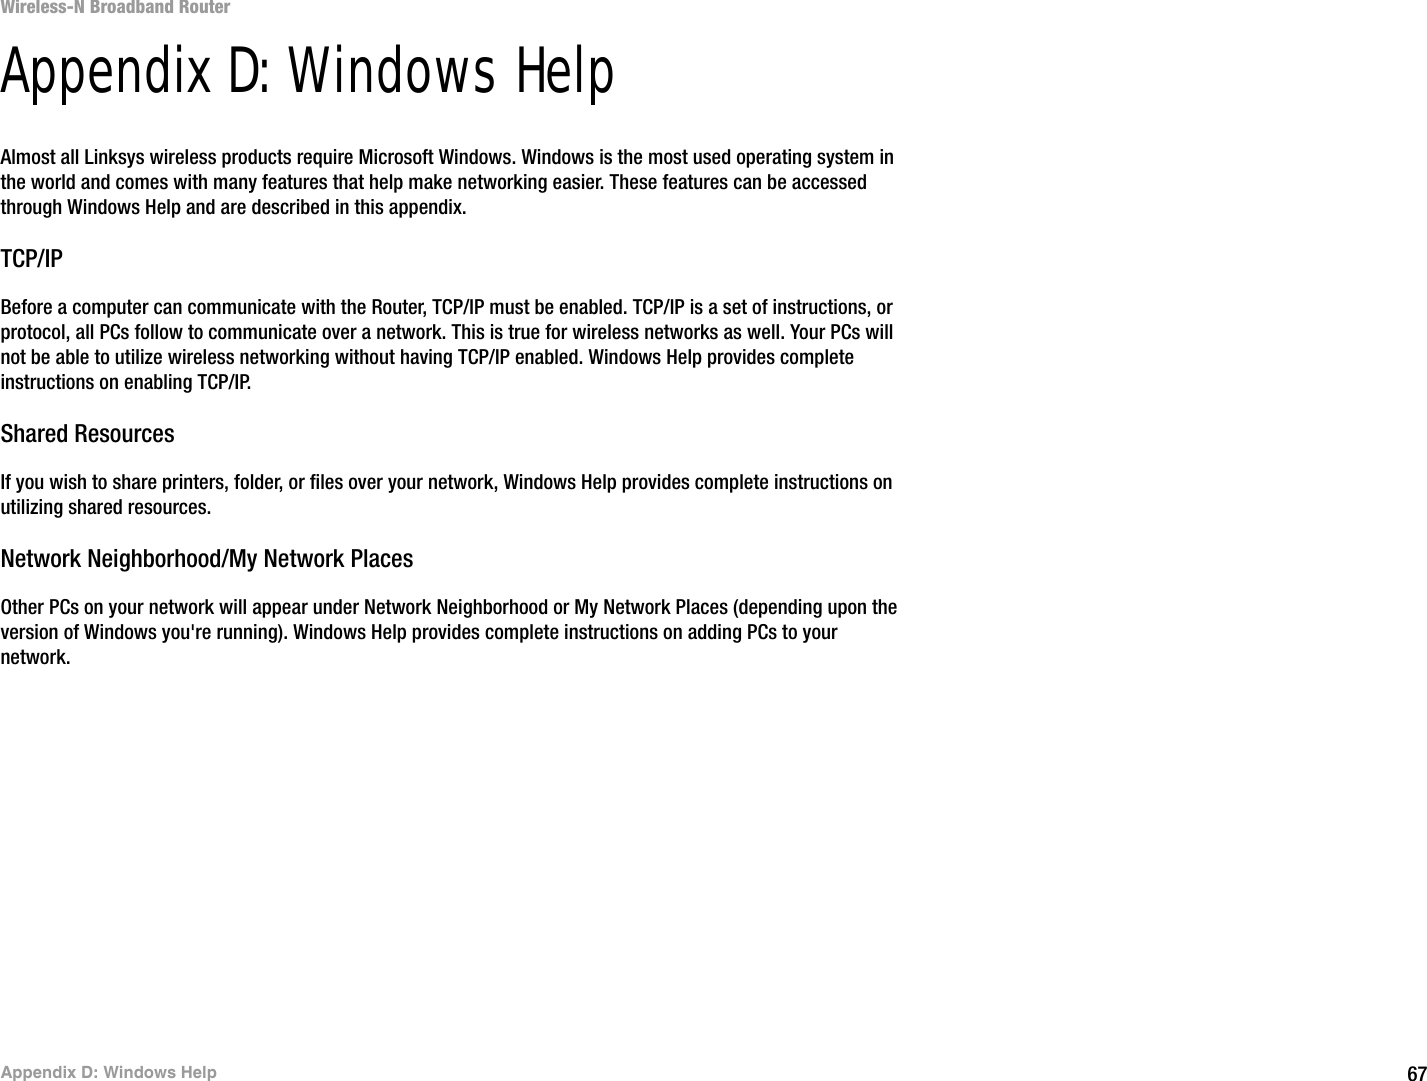 67Appendix D: Windows HelpWireless-N Broadband RouterAppendix D: Windows HelpAlmost all Linksys wireless products require Microsoft Windows. Windows is the most used operating system in the world and comes with many features that help make networking easier. These features can be accessed through Windows Help and are described in this appendix.TCP/IPBefore a computer can communicate with the Router, TCP/IP must be enabled. TCP/IP is a set of instructions, or protocol, all PCs follow to communicate over a network. This is true for wireless networks as well. Your PCs will not be able to utilize wireless networking without having TCP/IP enabled. Windows Help provides complete instructions on enabling TCP/IP.Shared ResourcesIf you wish to share printers, folder, or files over your network, Windows Help provides complete instructions on utilizing shared resources.Network Neighborhood/My Network PlacesOther PCs on your network will appear under Network Neighborhood or My Network Places (depending upon the version of Windows you&apos;re running). Windows Help provides complete instructions on adding PCs to your network.